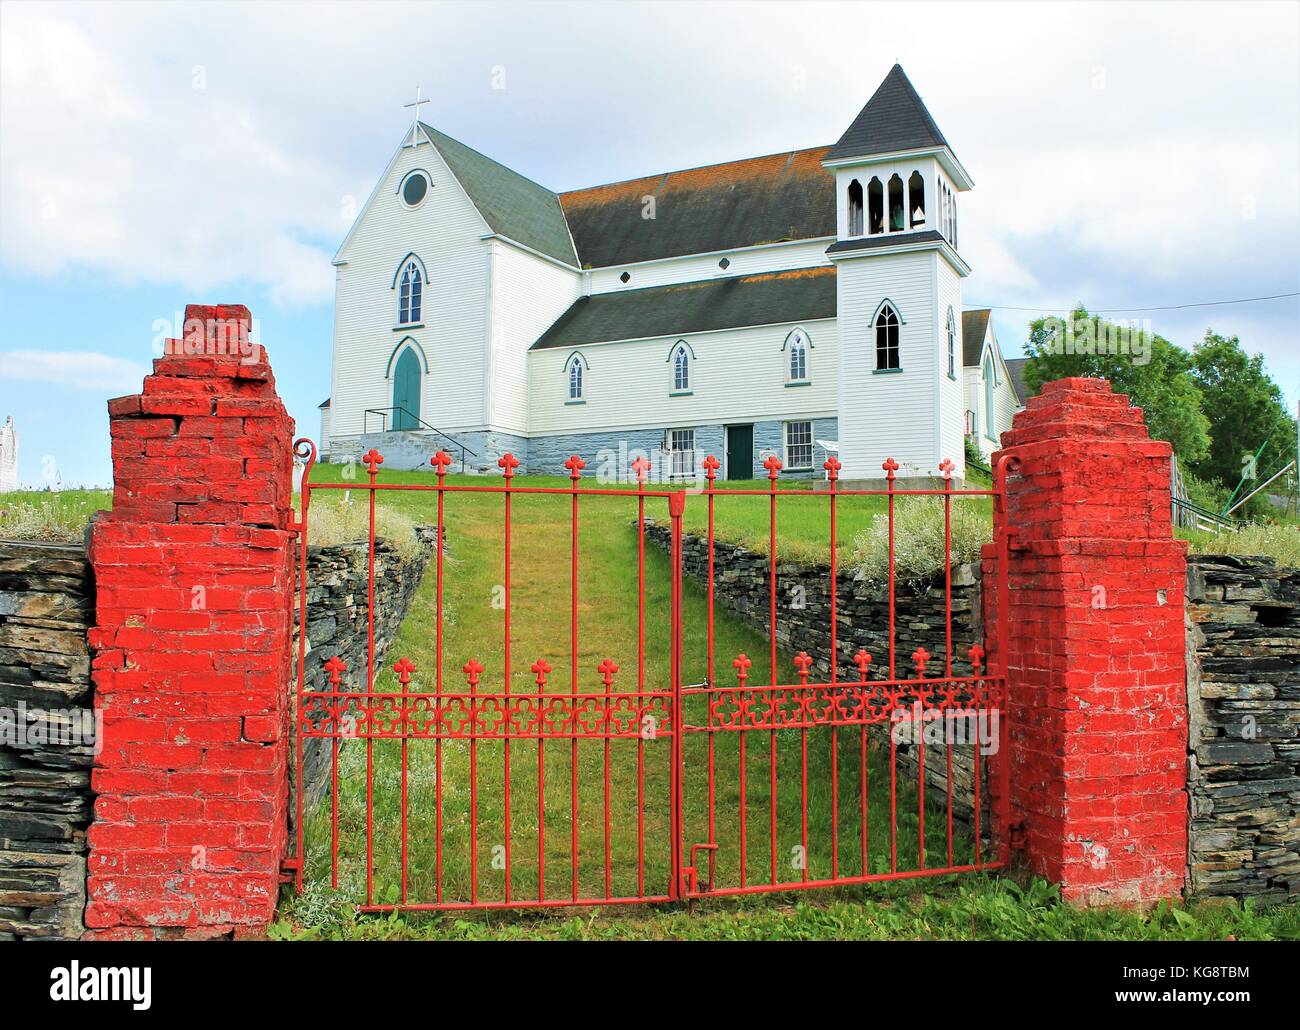 Old St. George's Church, Brigus, Newfoundland and Labrador. Looking from outside of red brick gate posts and iron gate, grass covered footpath. Stock Photo